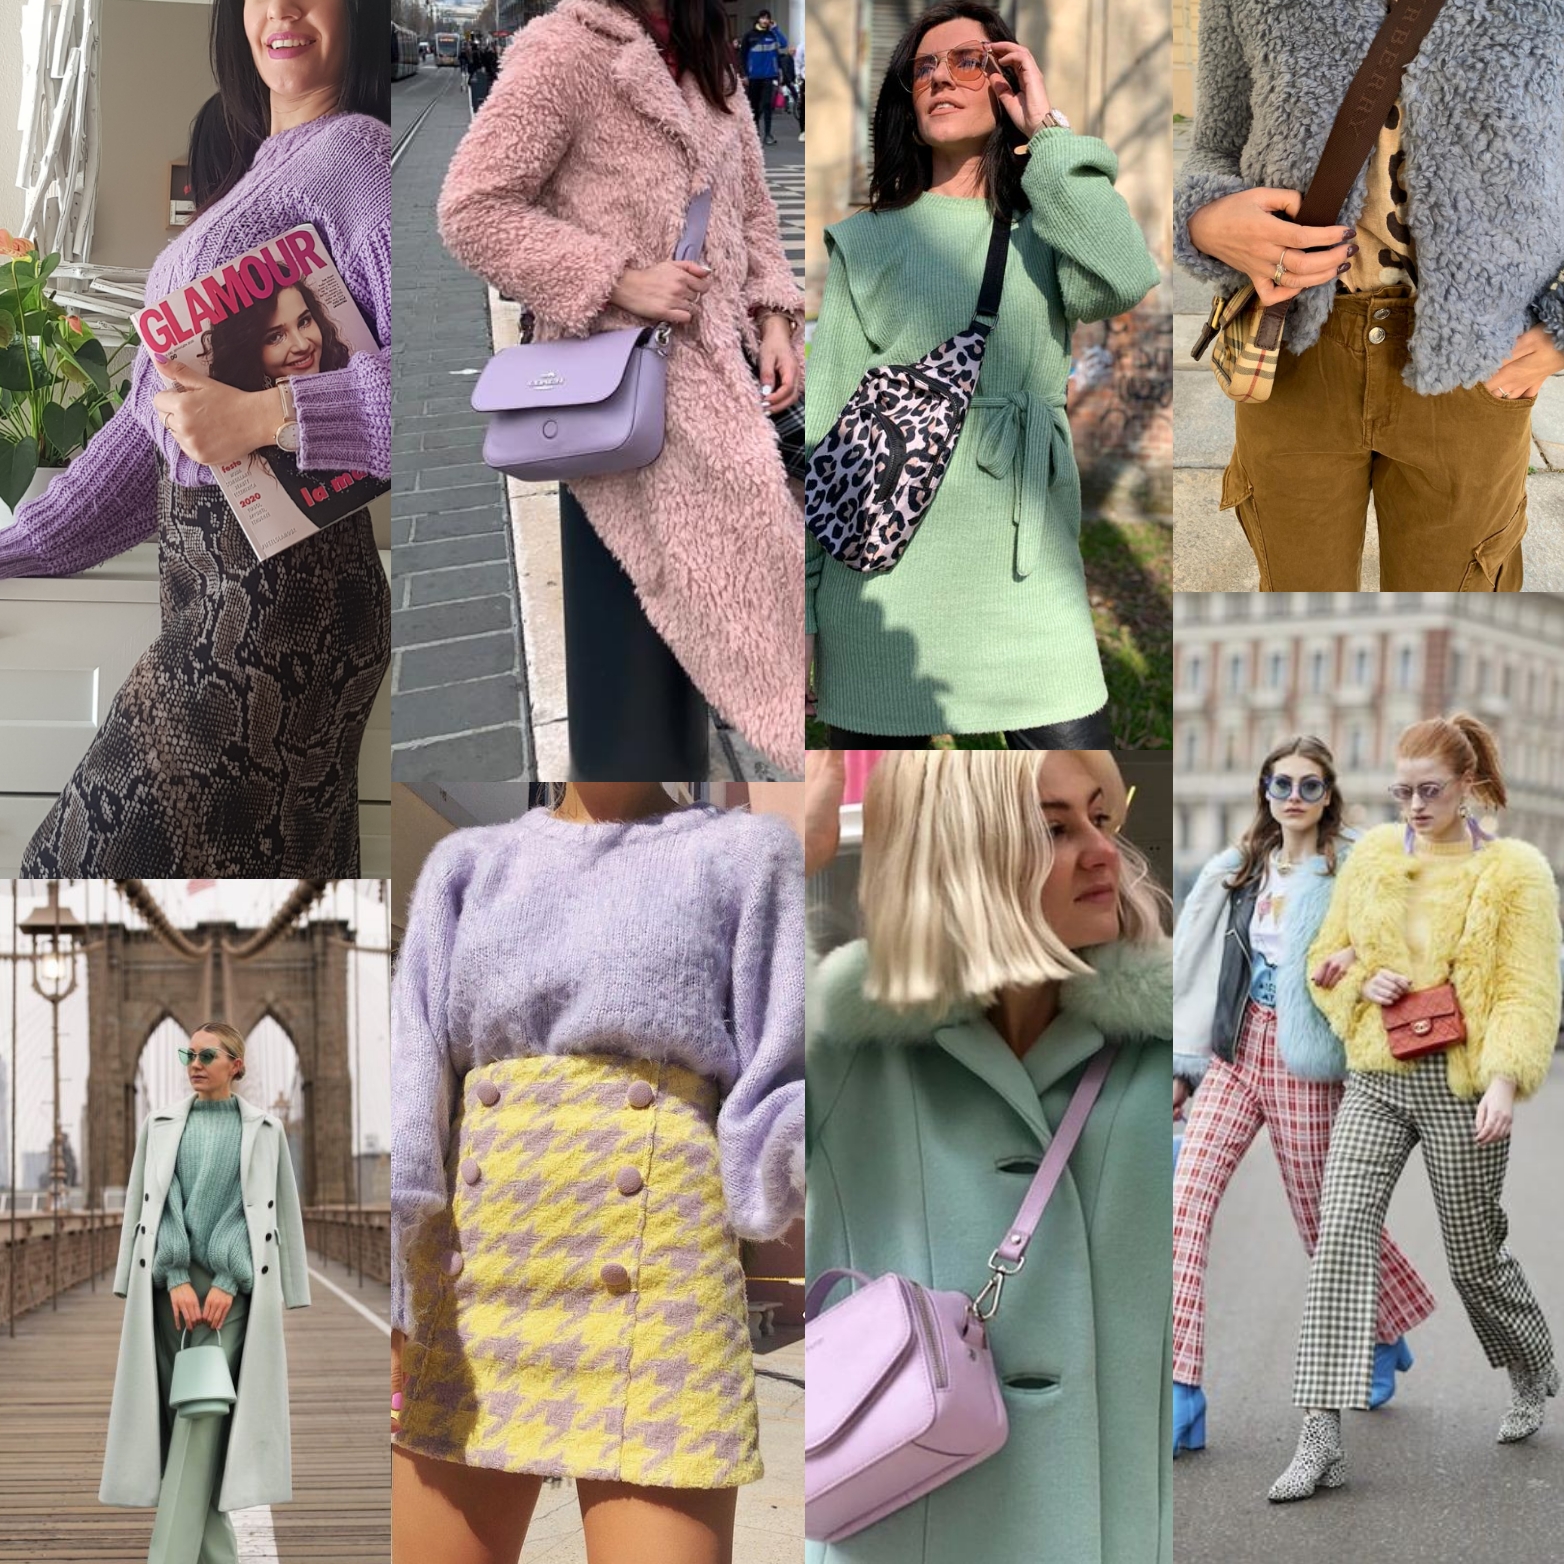 [:it]Pastel lover: Per le Amanti dei colori pastello come mixarli in inverno[:en]PASTEL LOVER: FOR LOVERS OF PASTEL COLORS HOW TO MIX THEM IN WINTER[:]